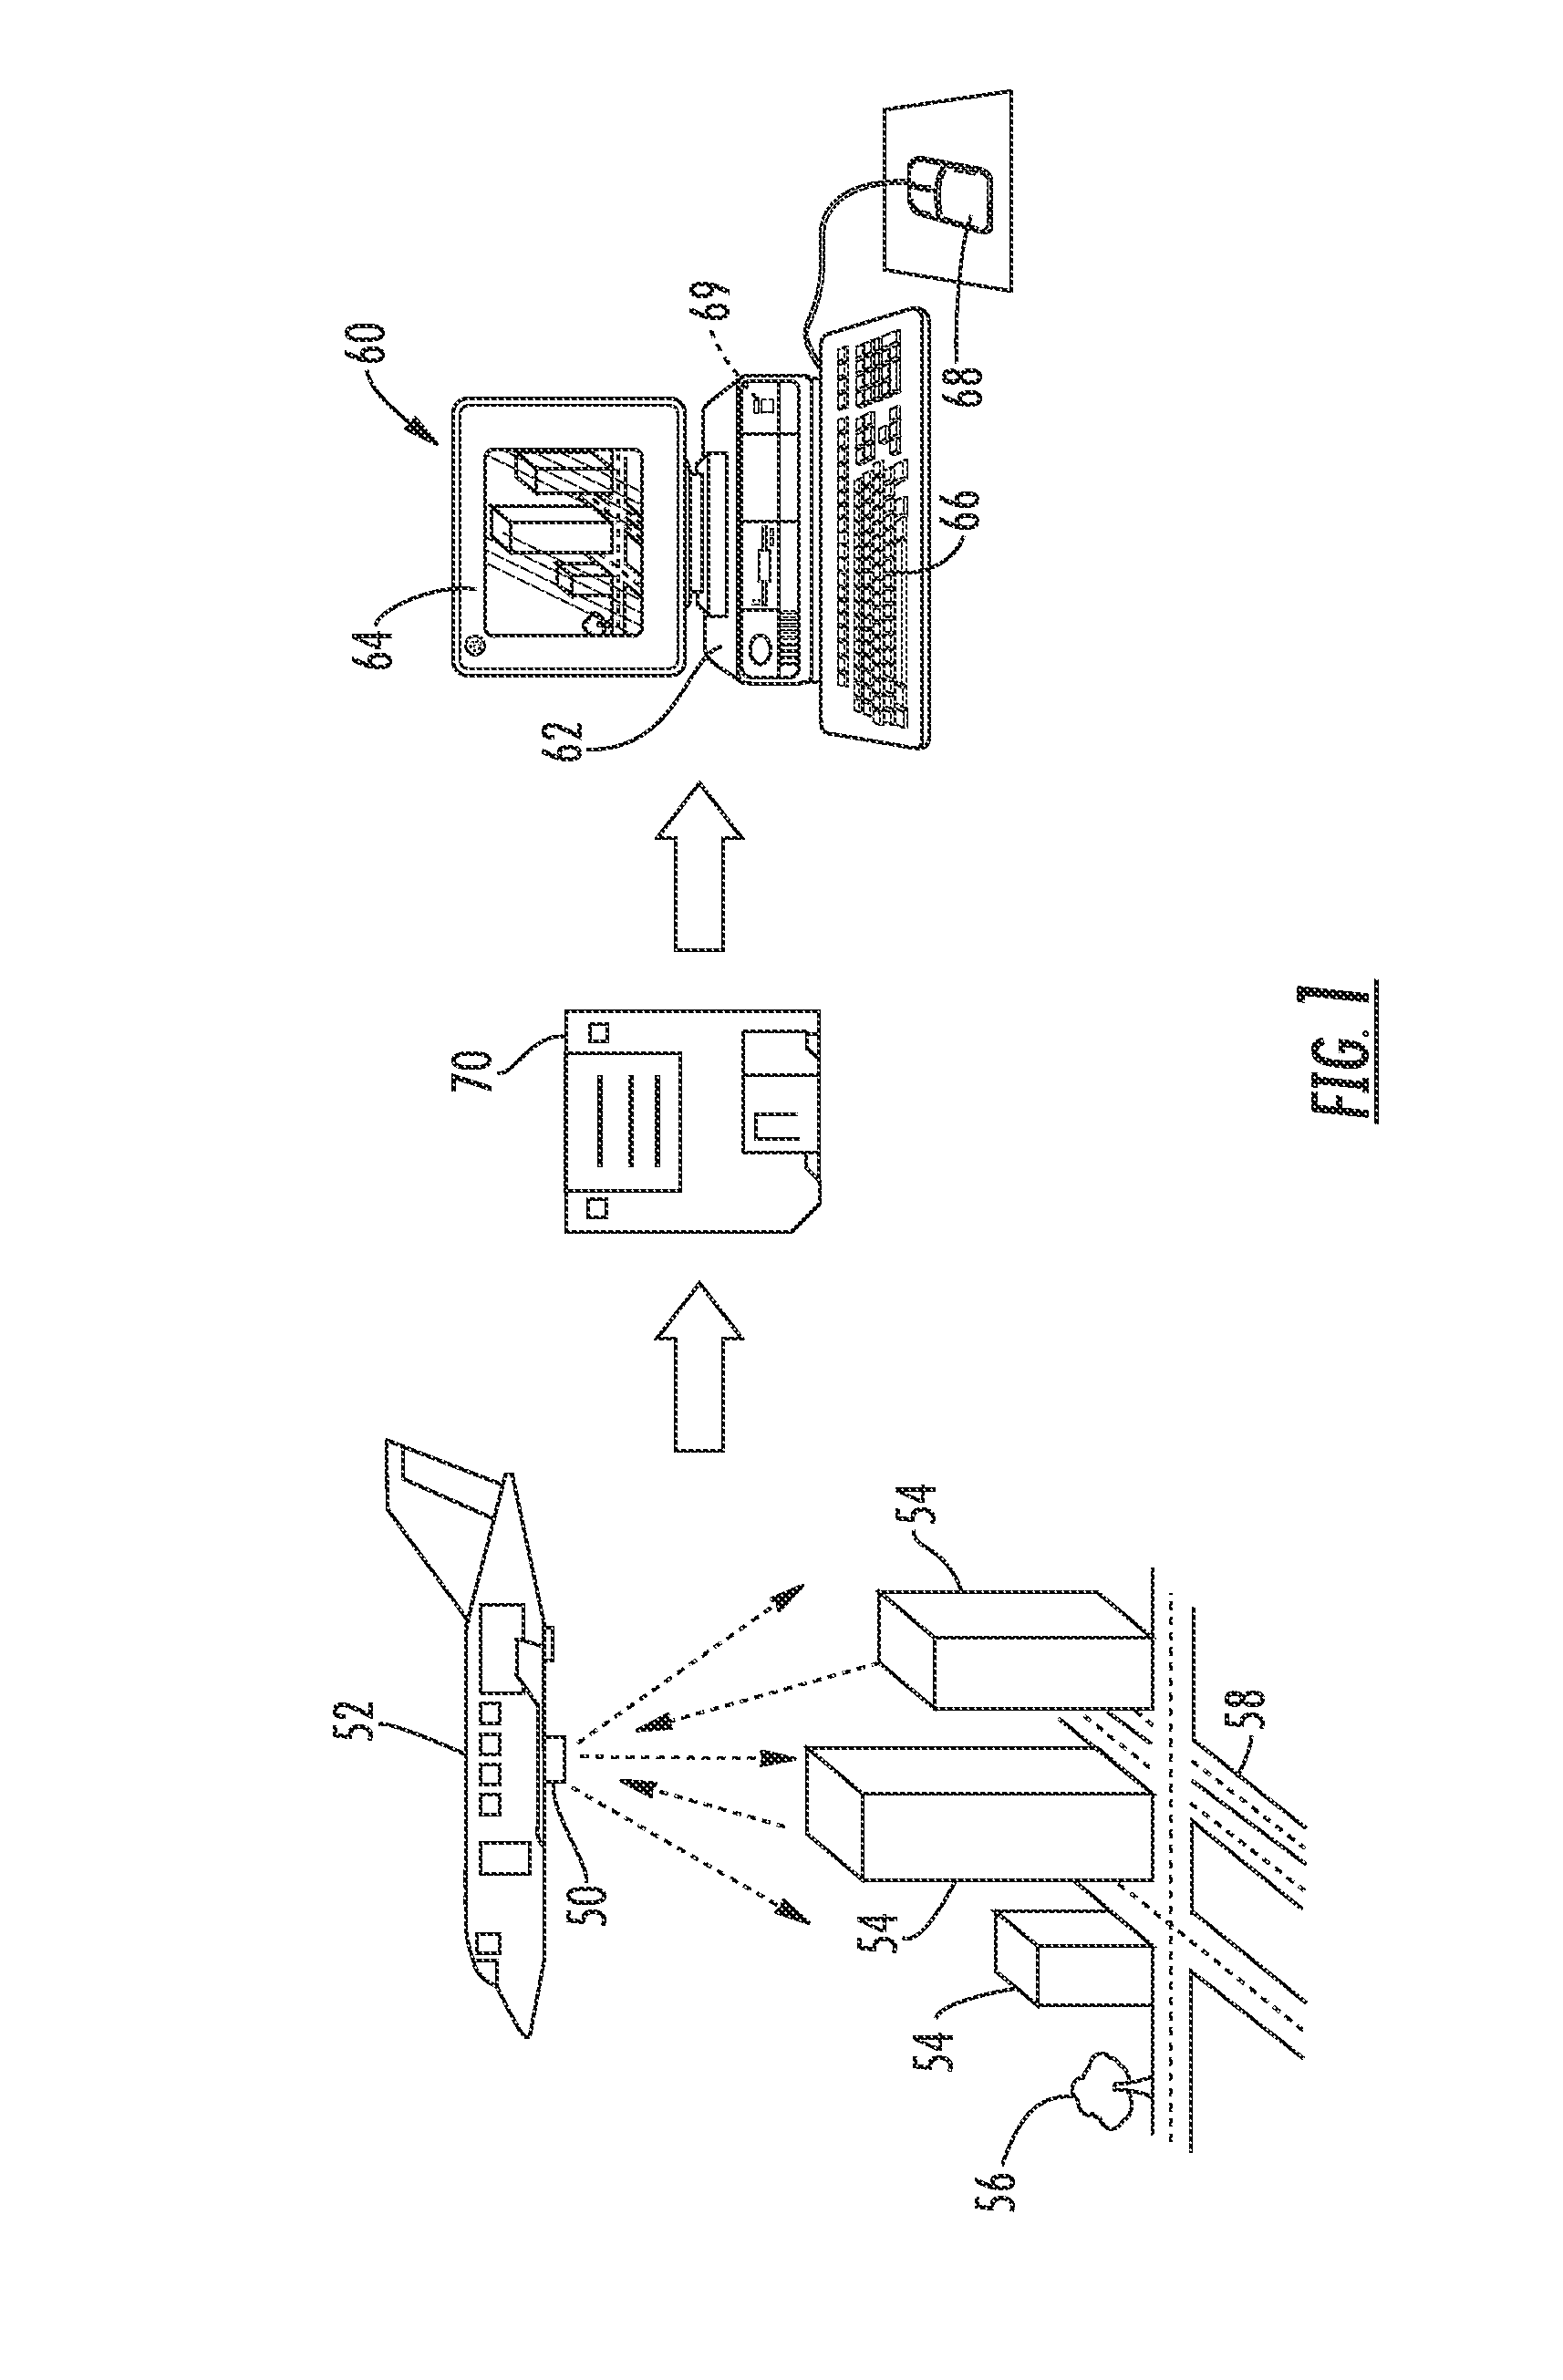 Method and apparatus for registration and vector extraction of SAR images based on an anisotropic diffusion filtering algorithm